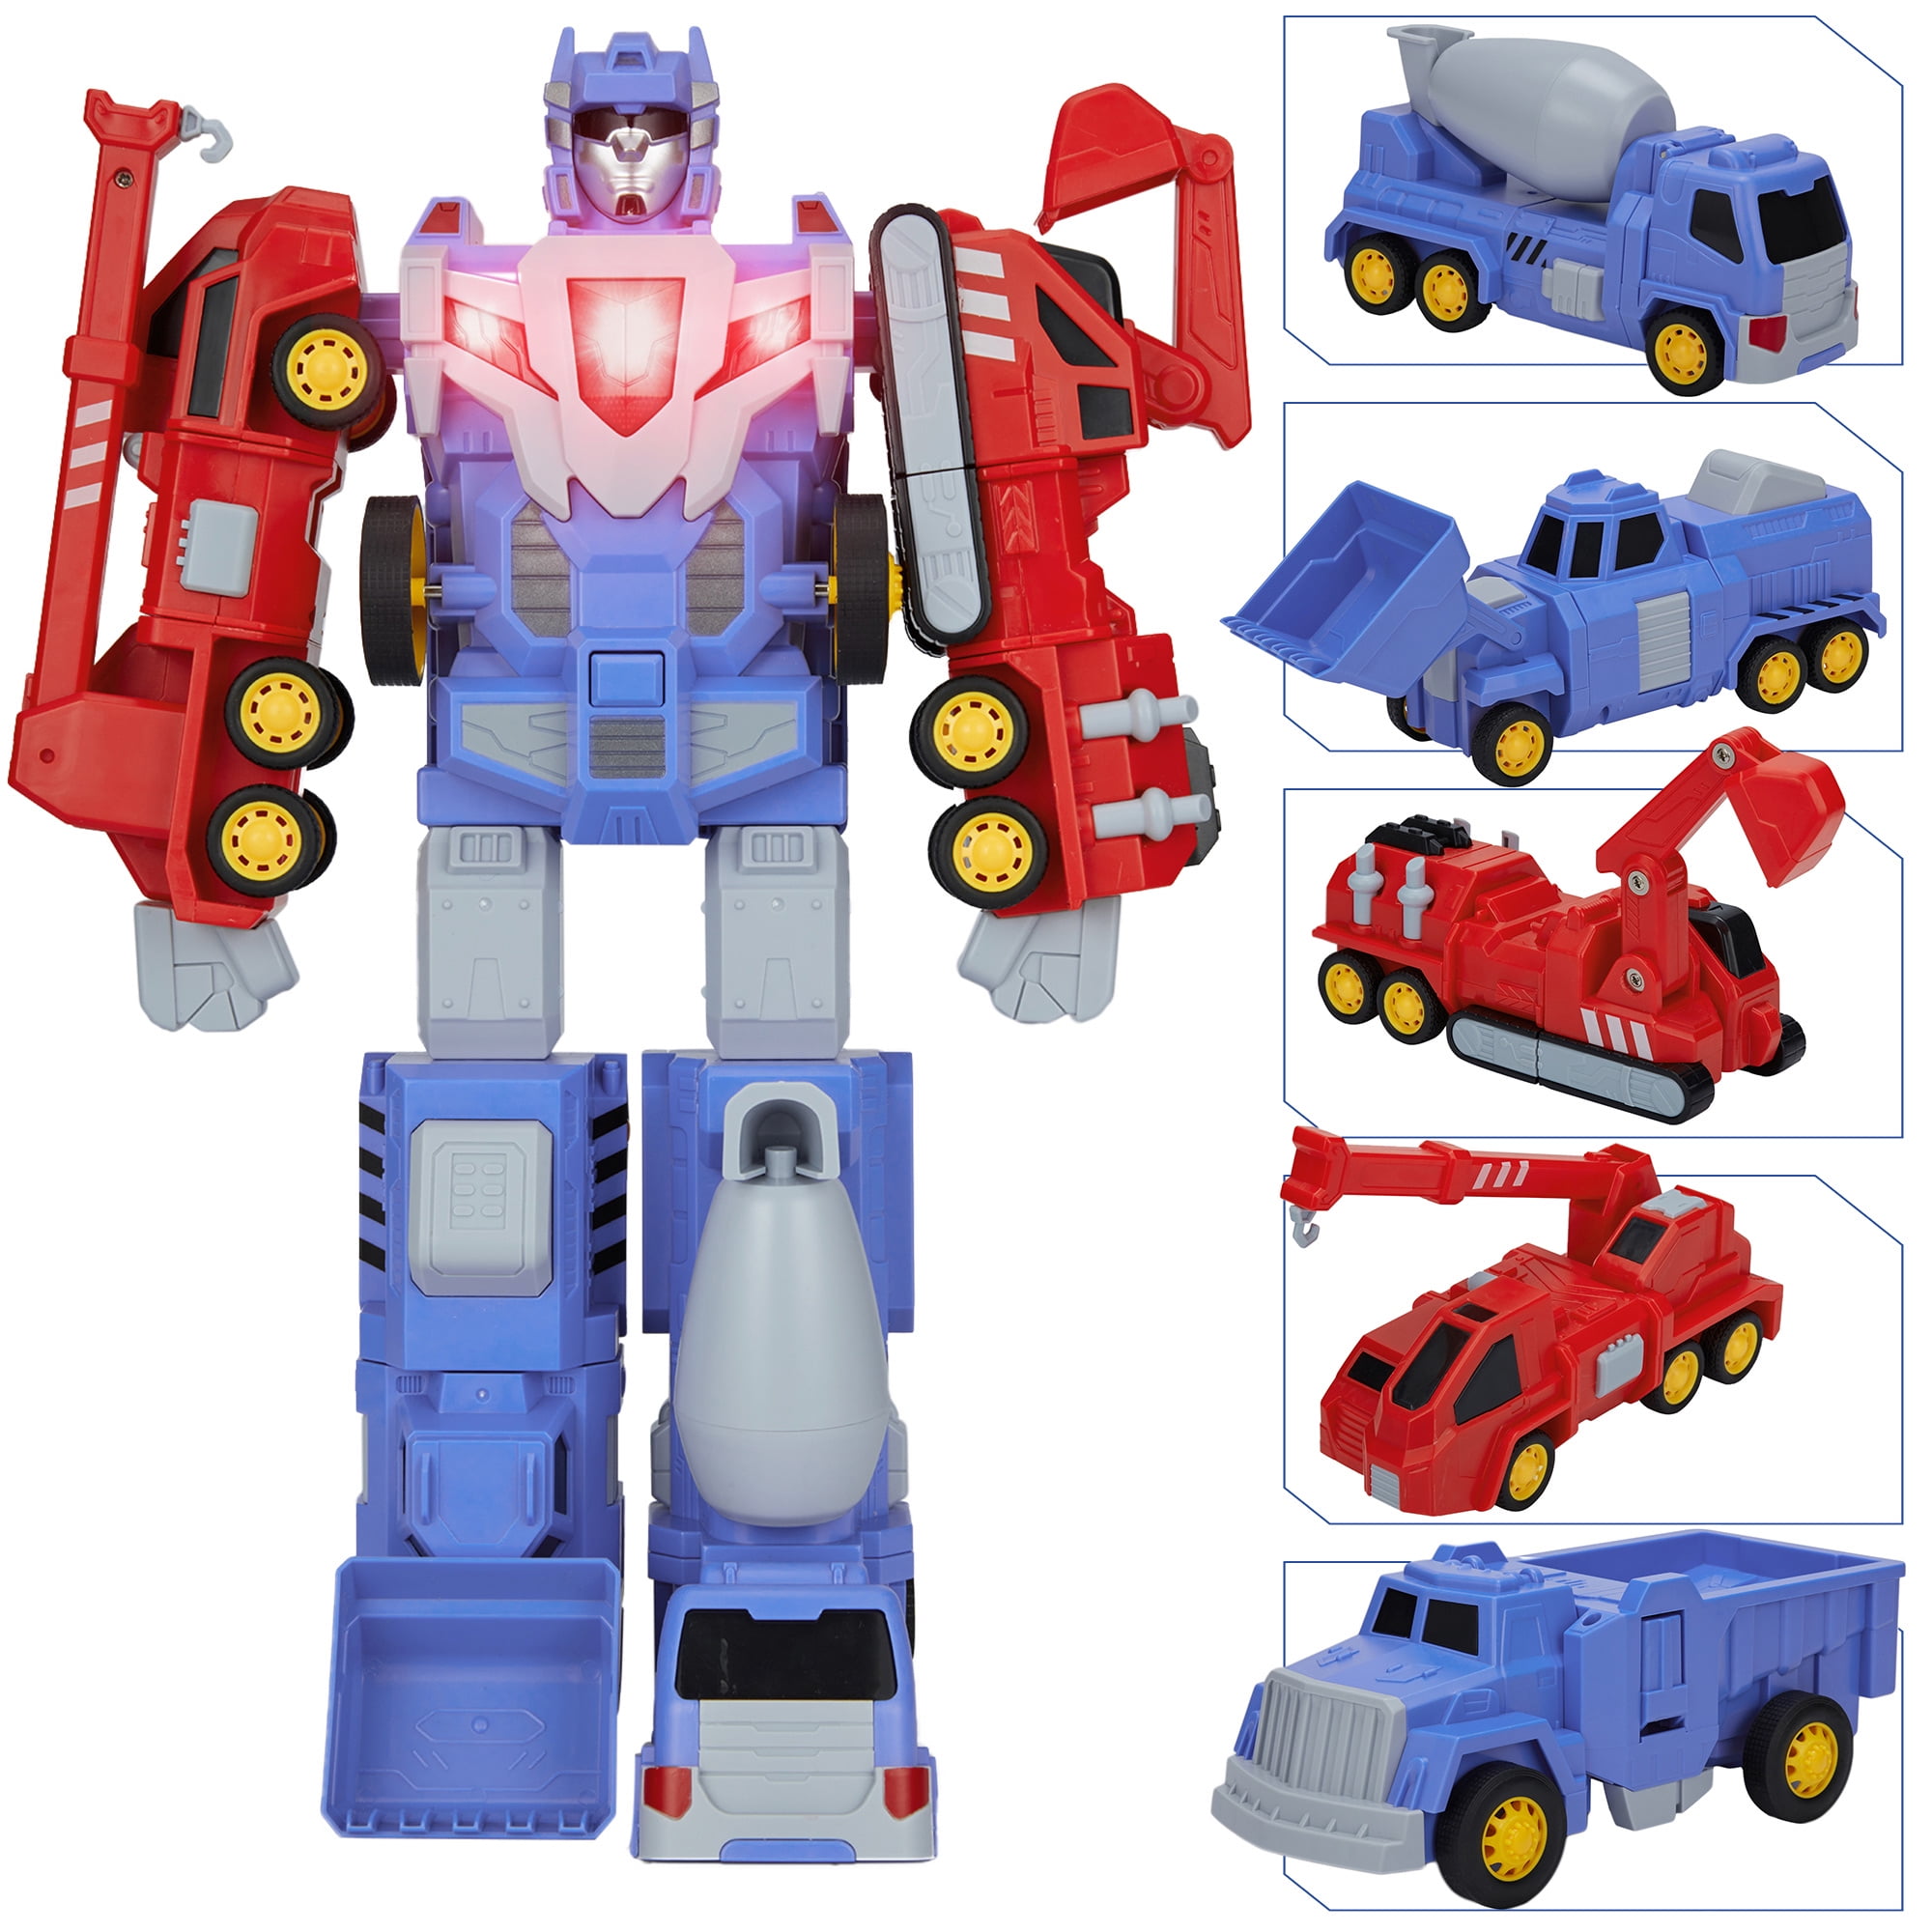 Details about   Actionfigure Transformers Car Autobots Big Robot WarToy Kids B'day Free Shipping 